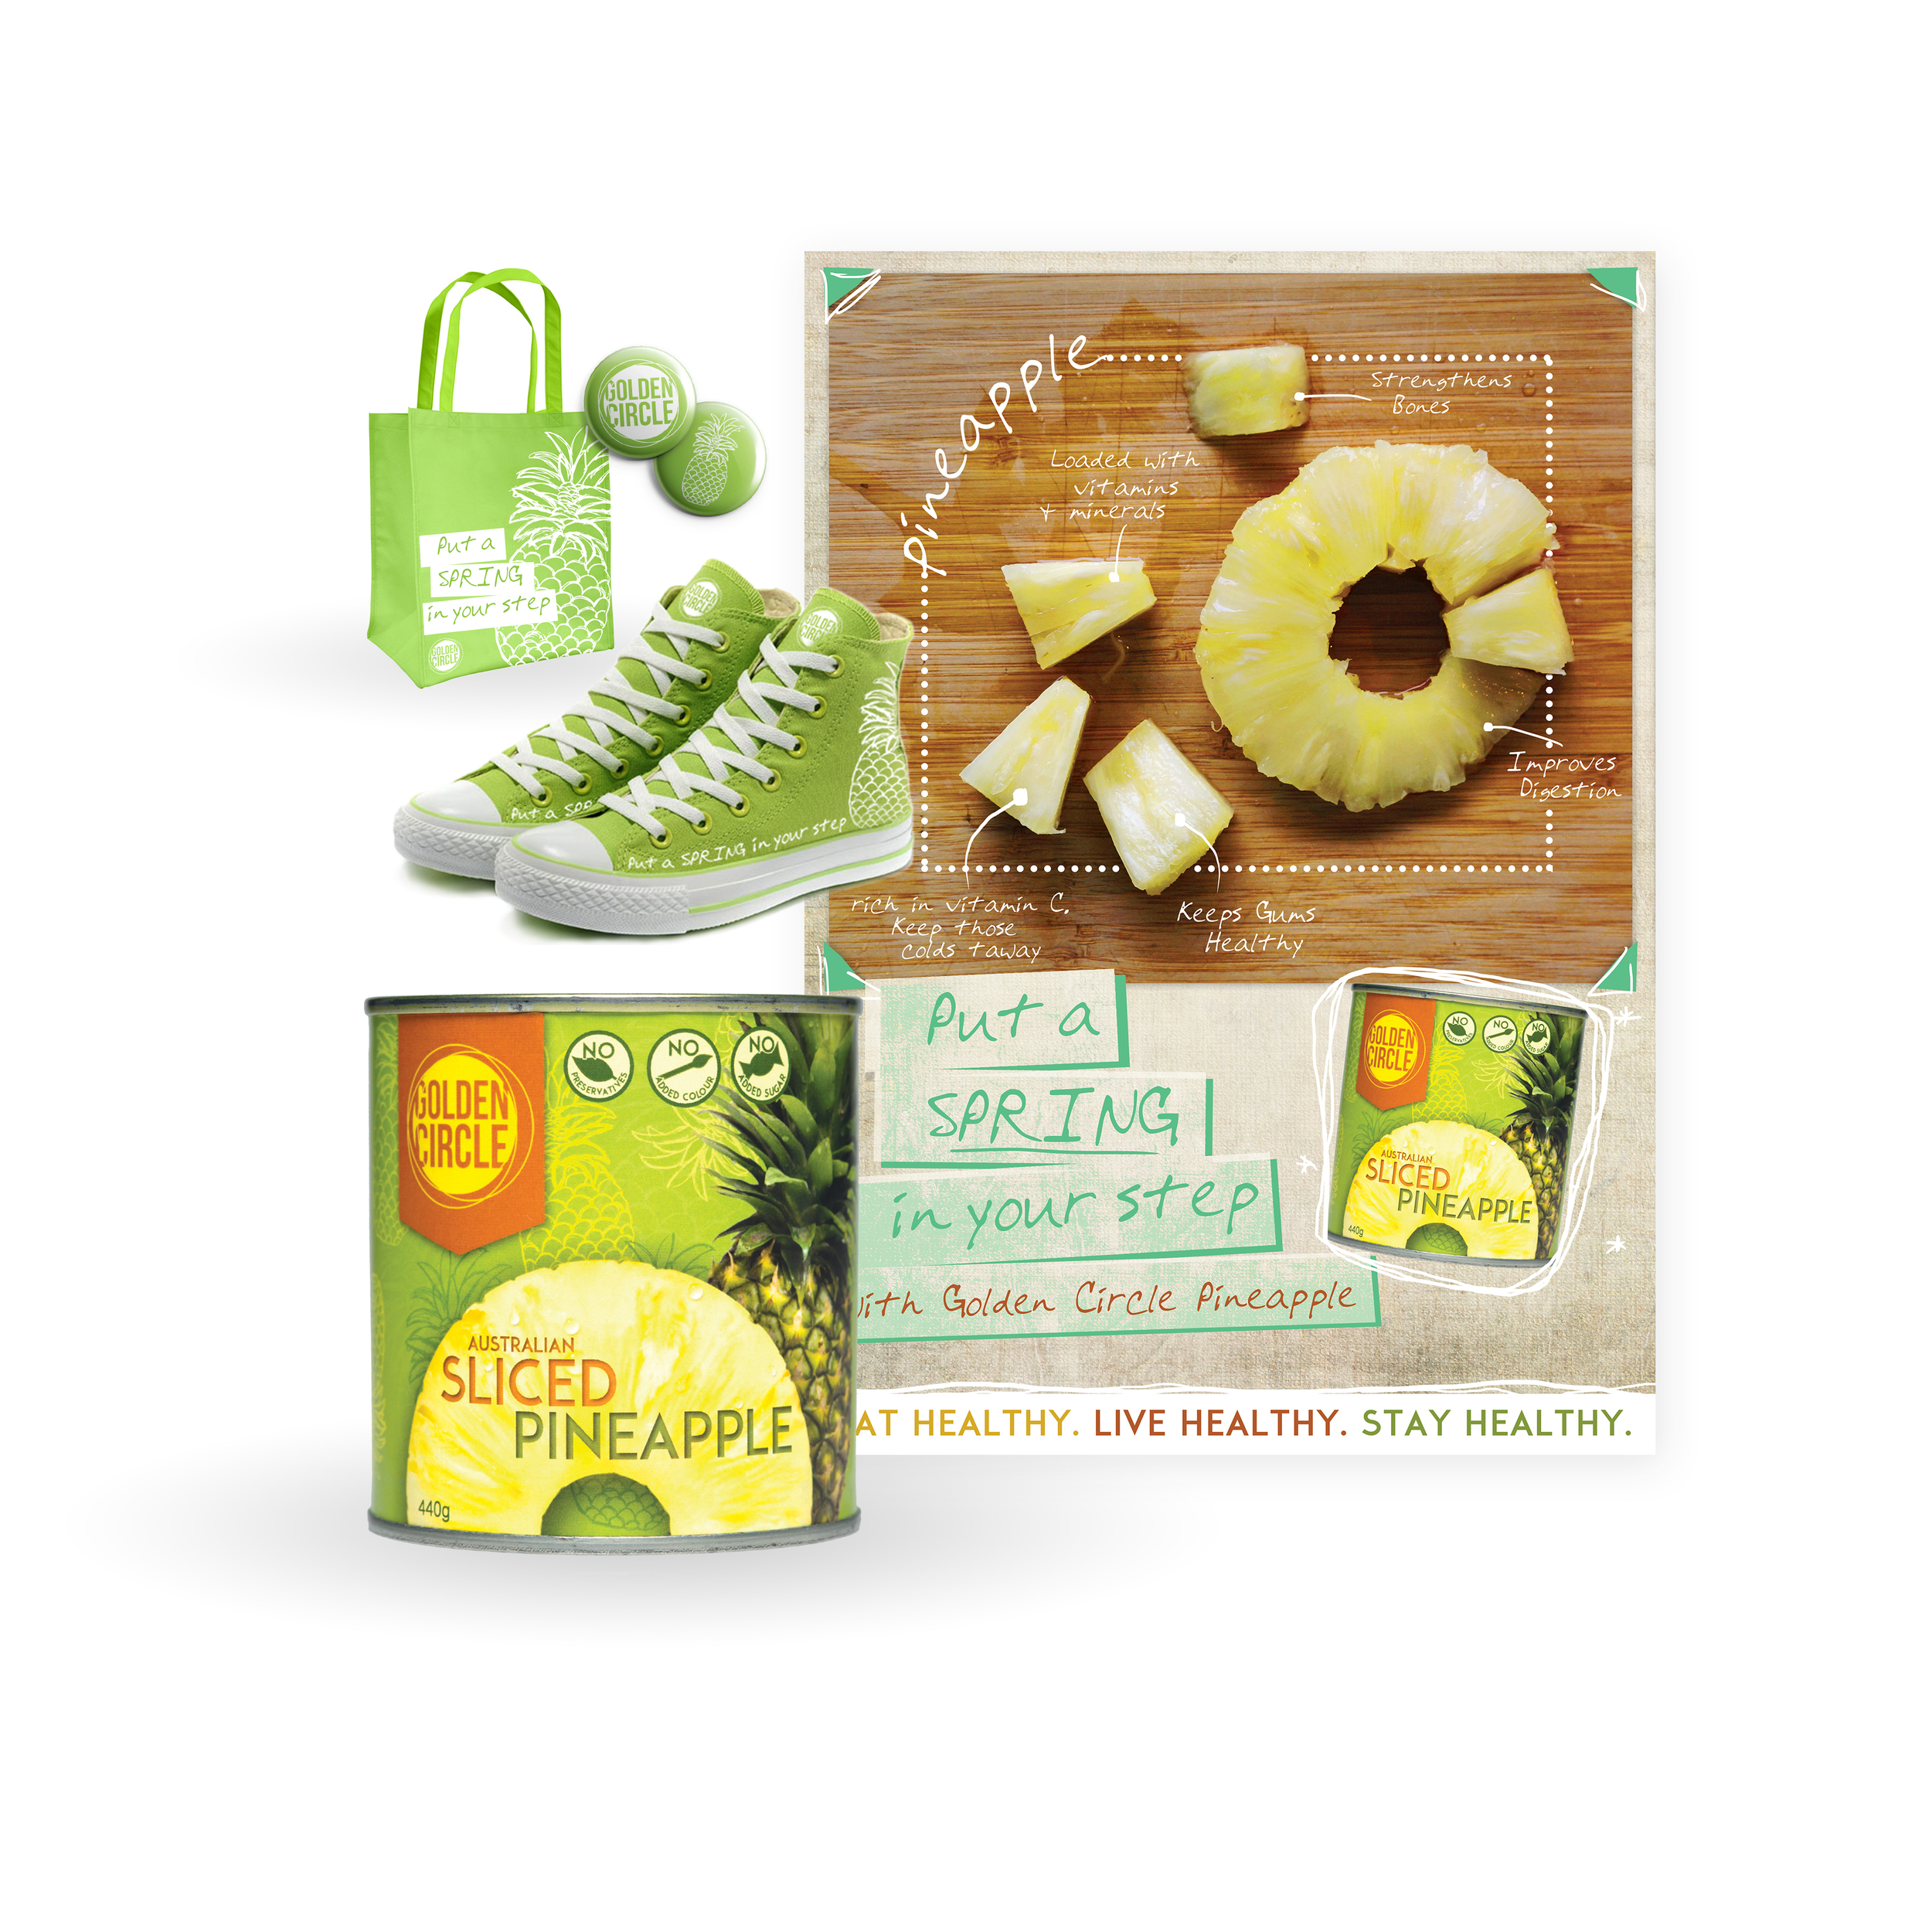  Fictional redesign of Golden Circle Tinned Pineapple. Including magazine ad design, and promotional shoes, bag and pins.&nbsp; 